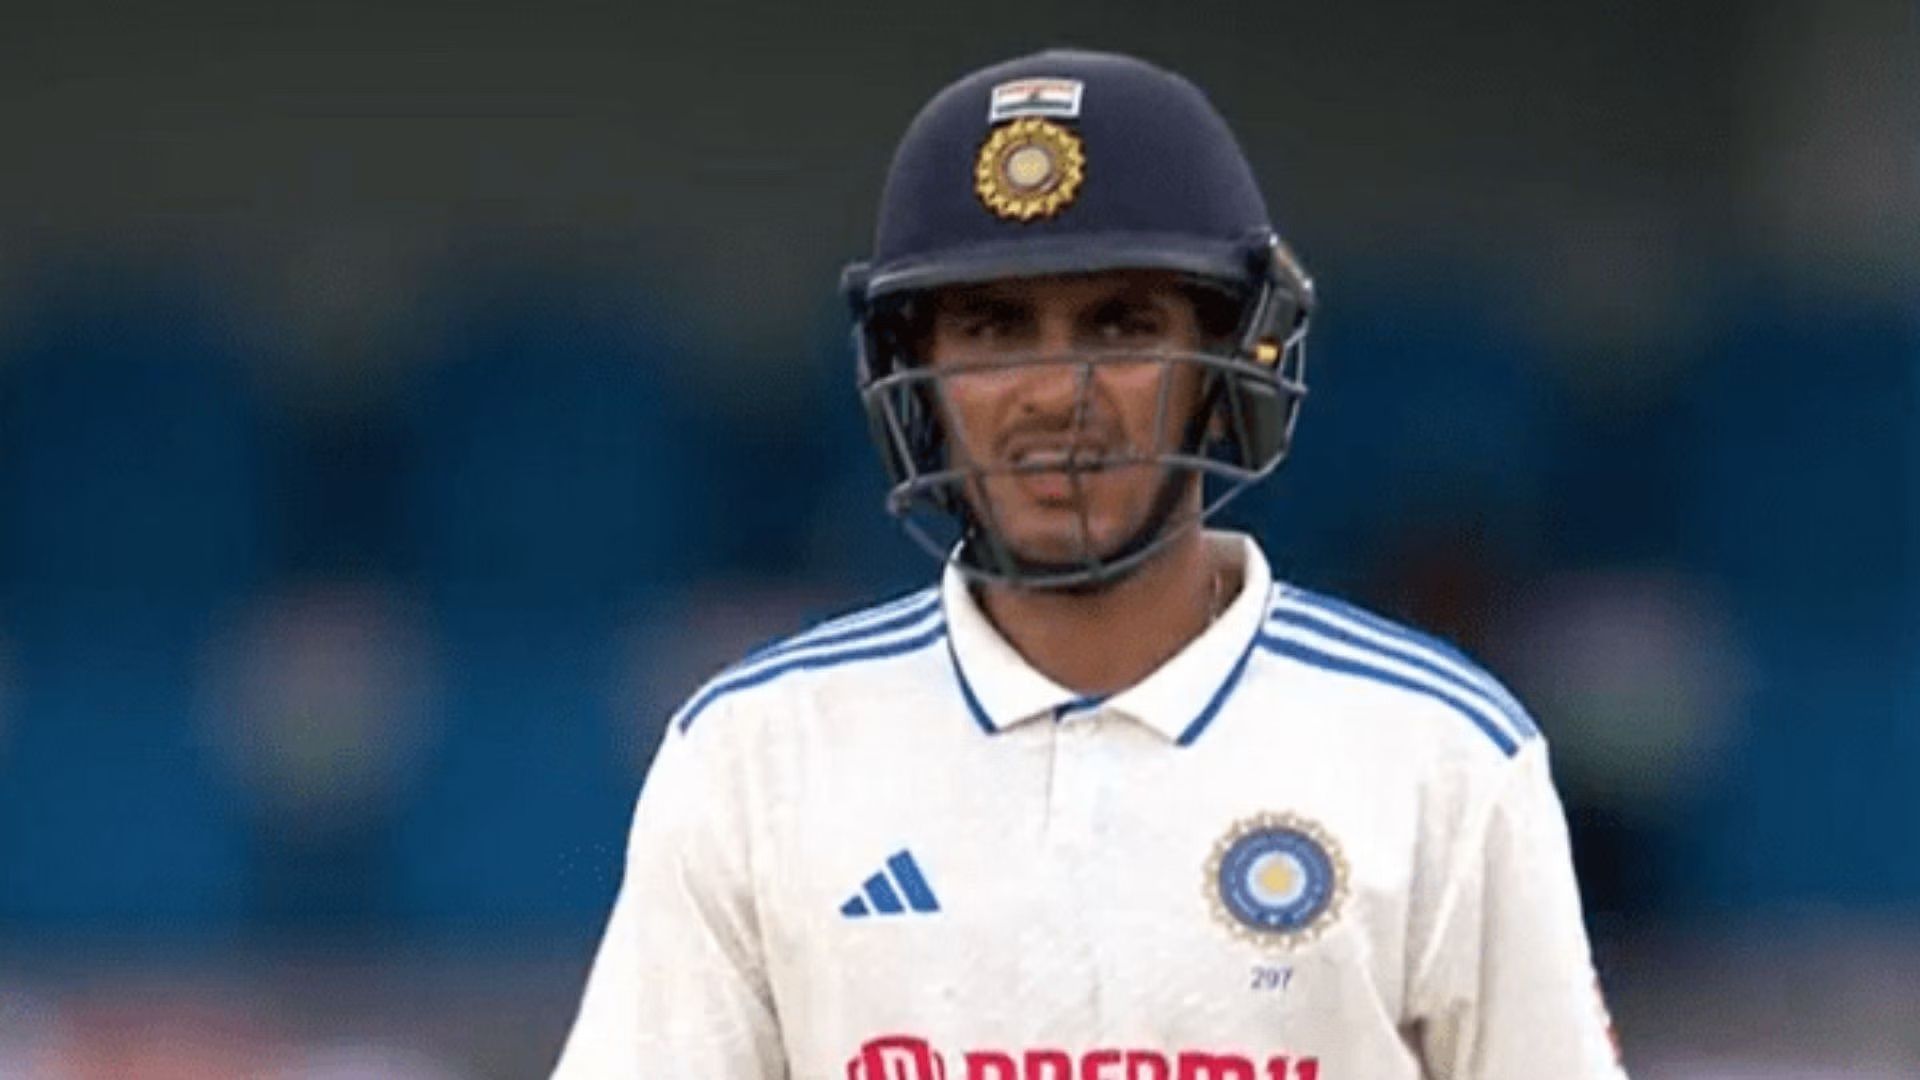 Shubman Gill did not have a great time in the Test series against the West Indies. [P/C: Twitter]